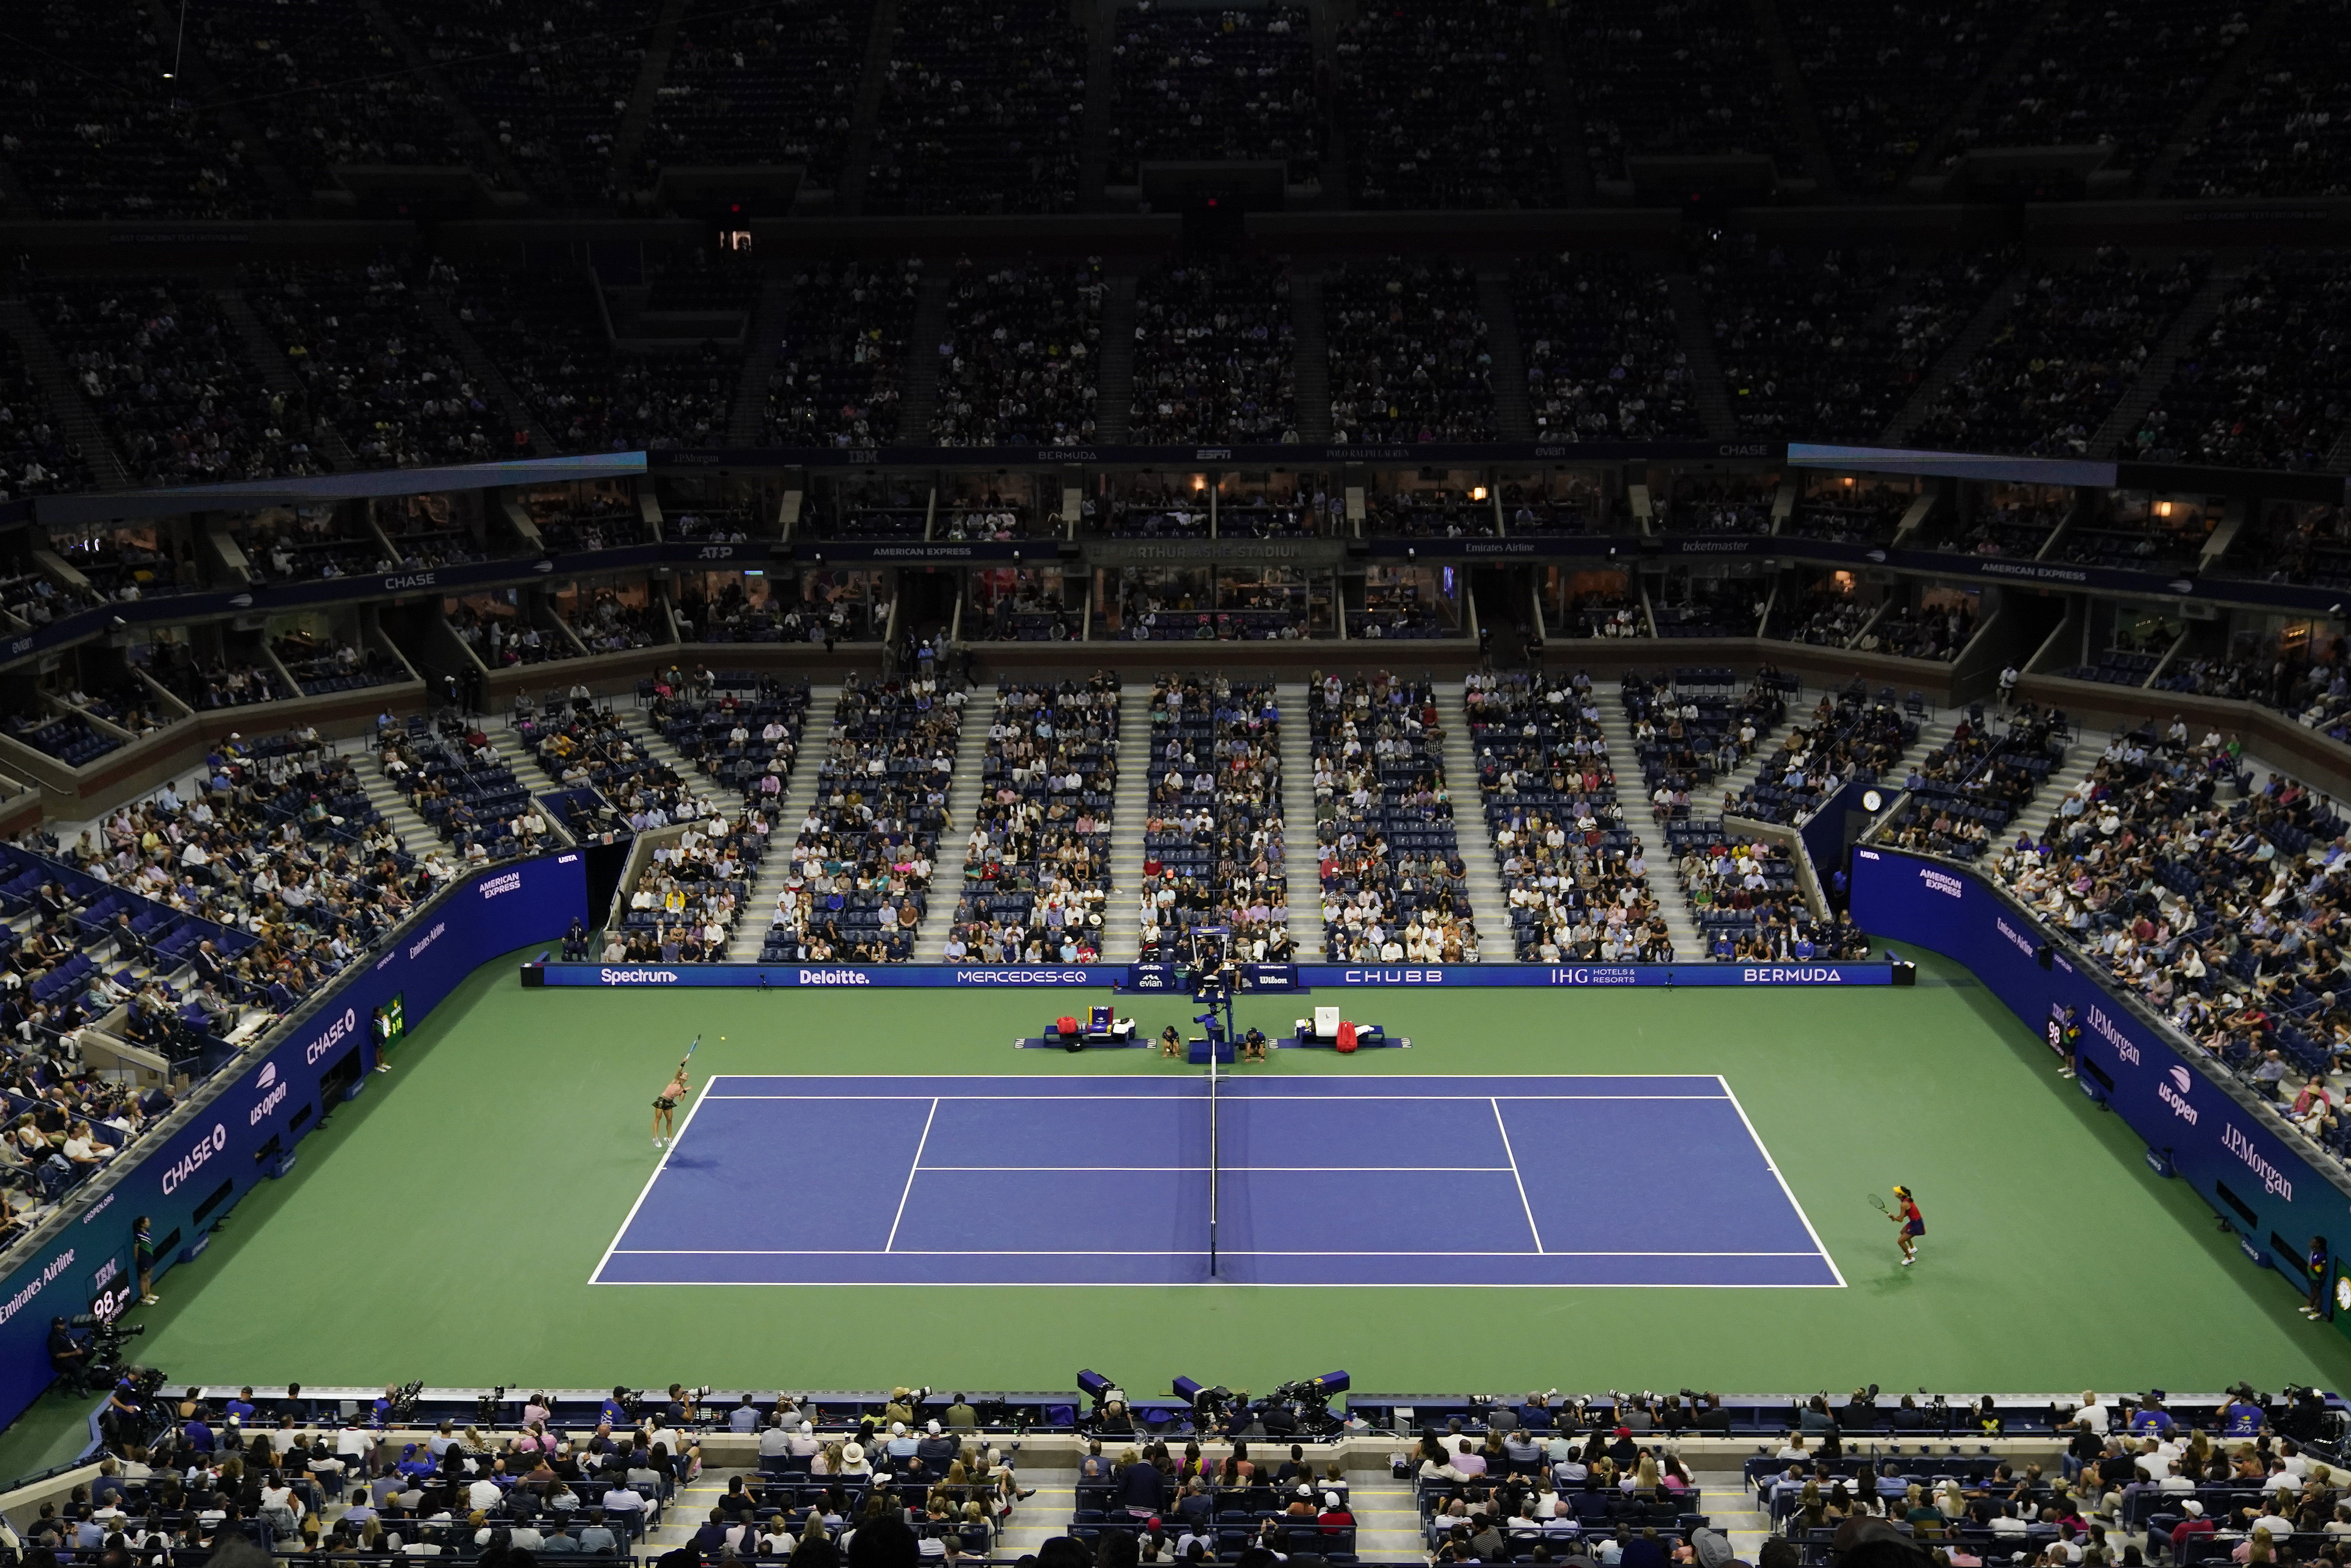 How to watch womens final at US Open 2021 Free live stream, time, TV, channel for Emma Raducanu vs